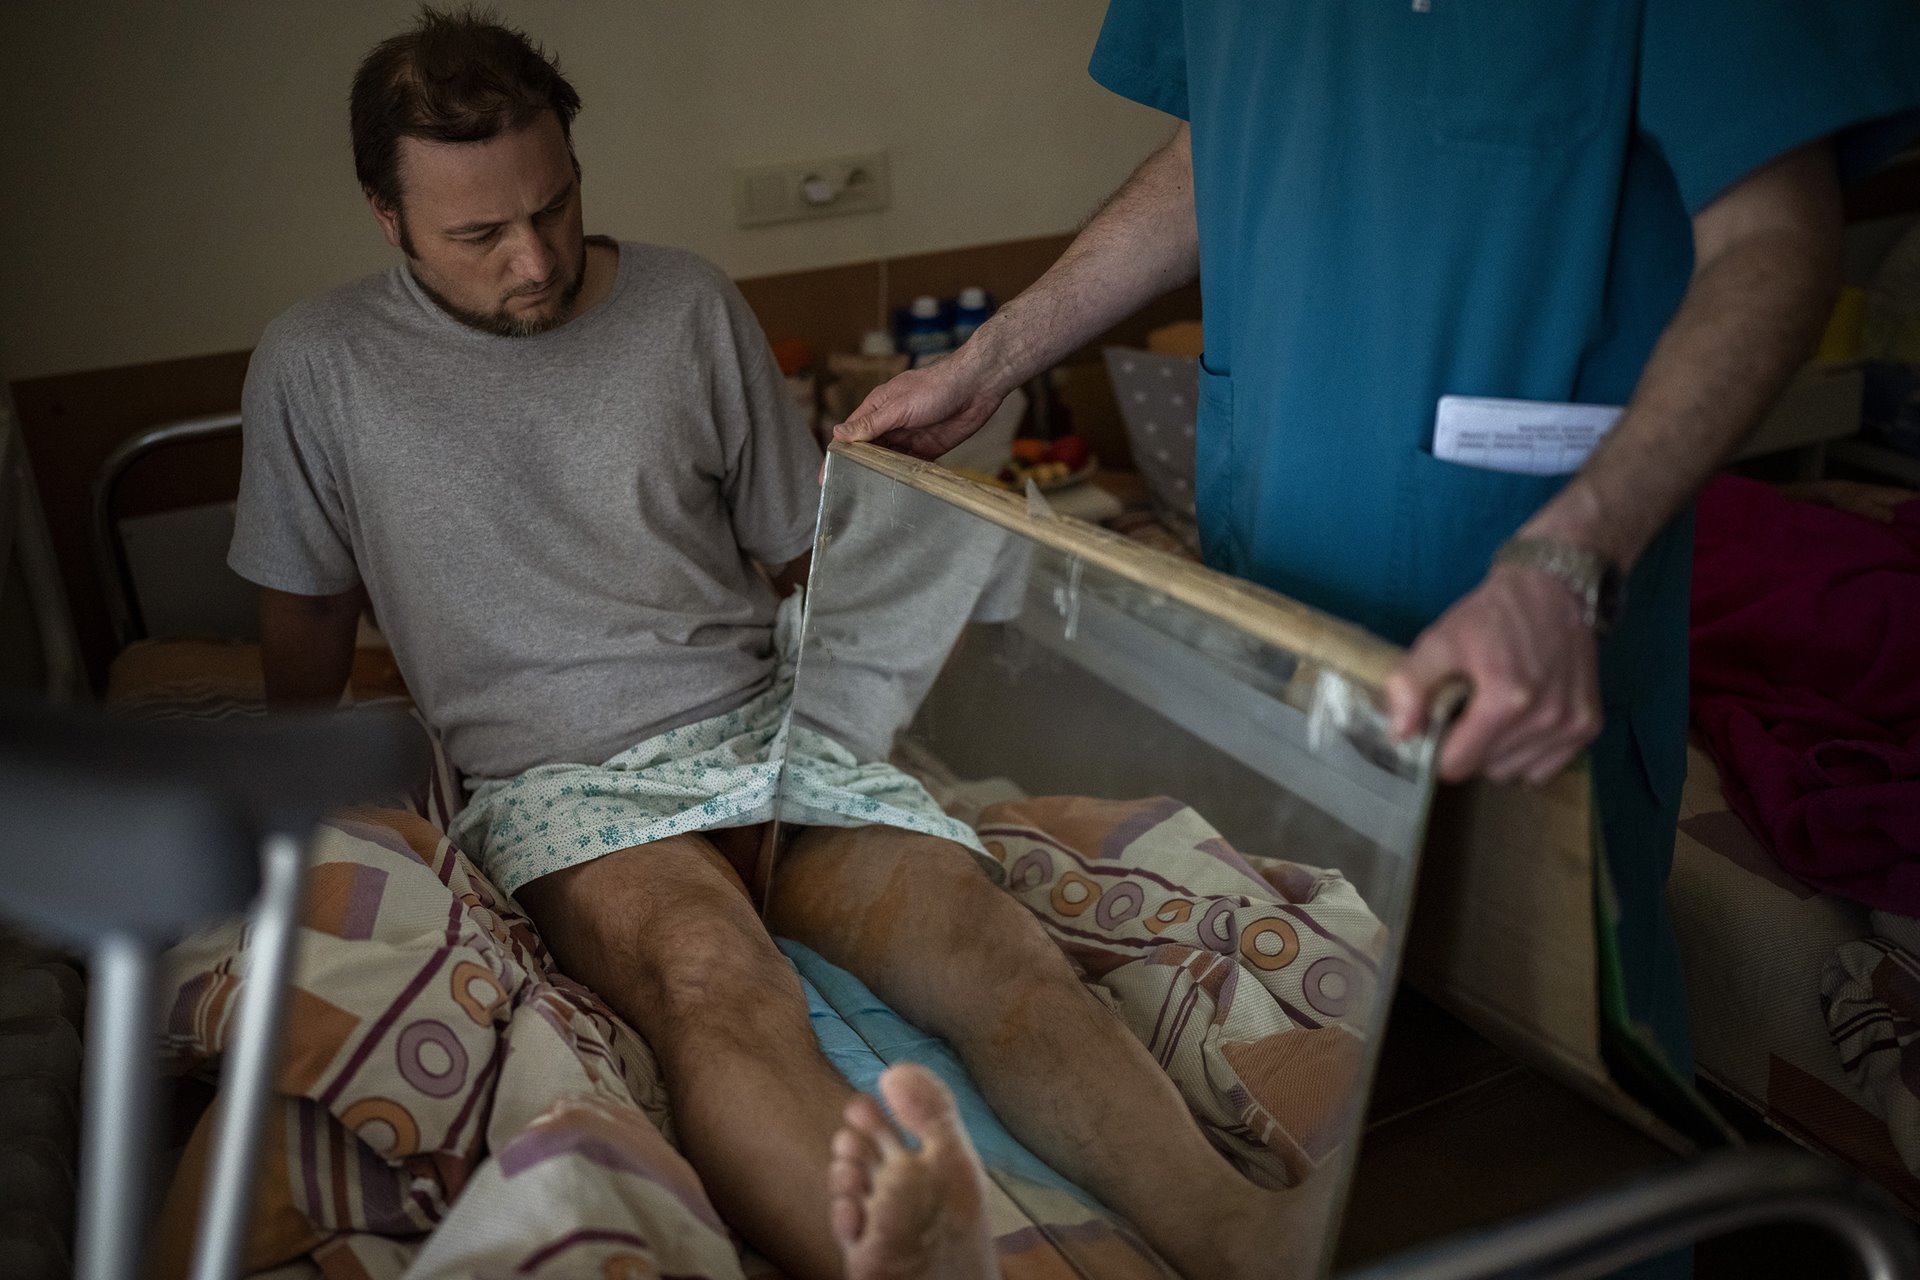 Sasha Horokhivskyi (38) undergoes mirror therapy to alleviate phantom pain (in which part of an amputated limb seems to be hurting), at a public hospital in Kyiv, Ukraine. Sasha lost his leg above the knee on 22 March, after being shot in the calf by a member of Ukraine&rsquo;s Territorial Defense Forces who mistook him for a spy, after he stopped to take photographs of bombed buildings near his home in Bobrovytsya, in northern Ukraine.